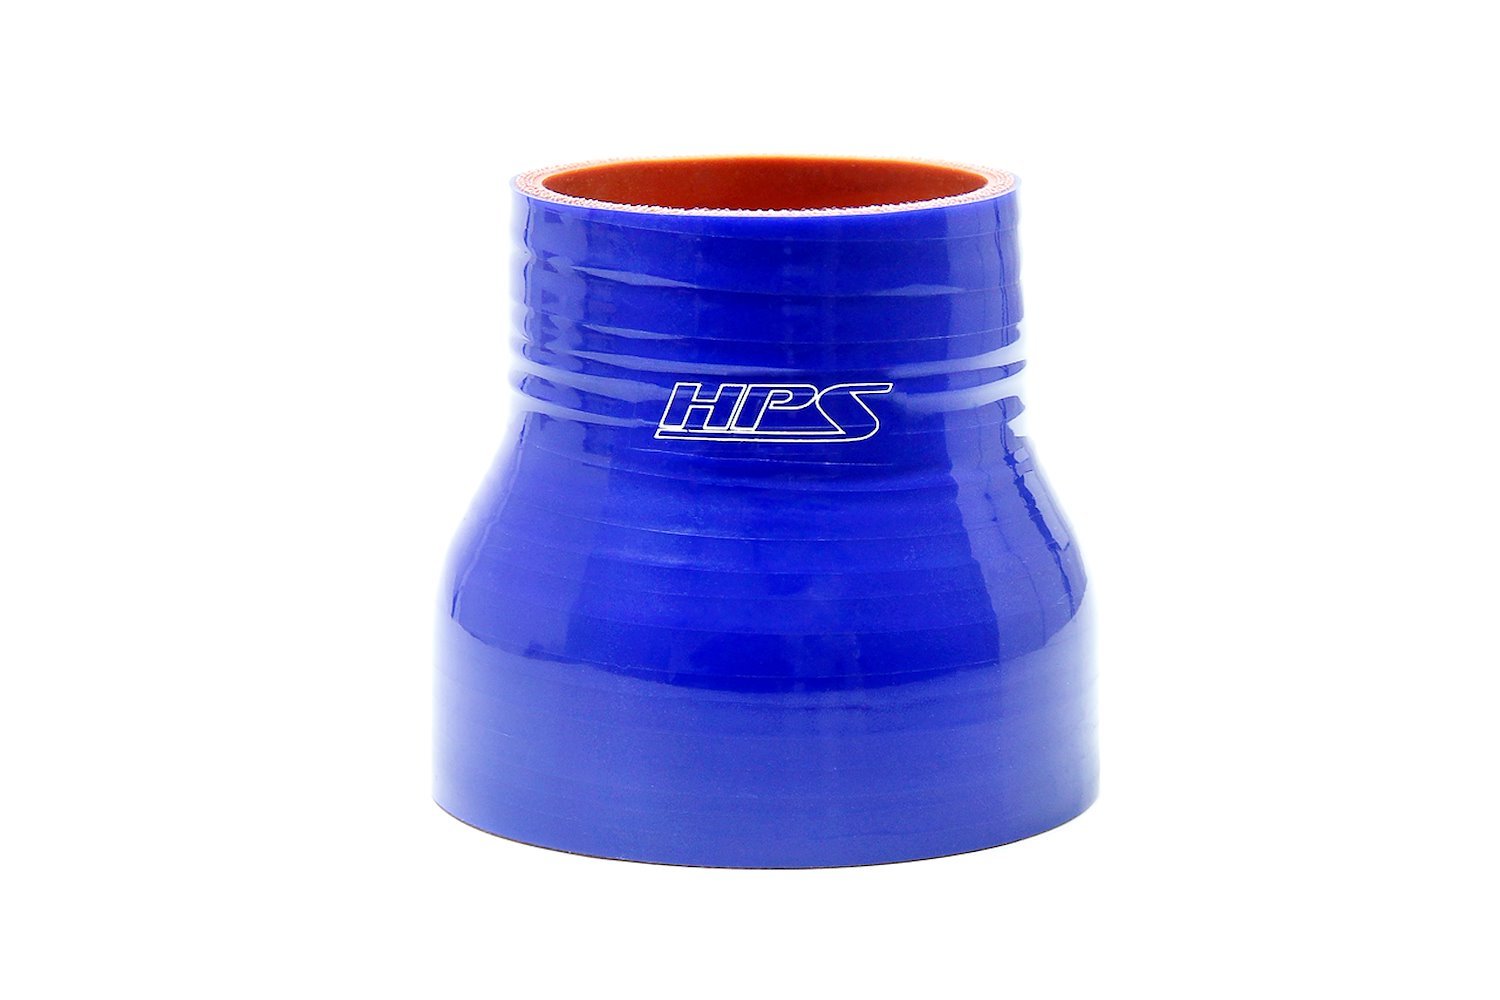 HTSR-225-300-L4-BLUE Silicone Reducer Hose, High-Temp 4-Ply Reinforced, 2-1/4 in. - 3 in. ID, 4 in. Long, Blue